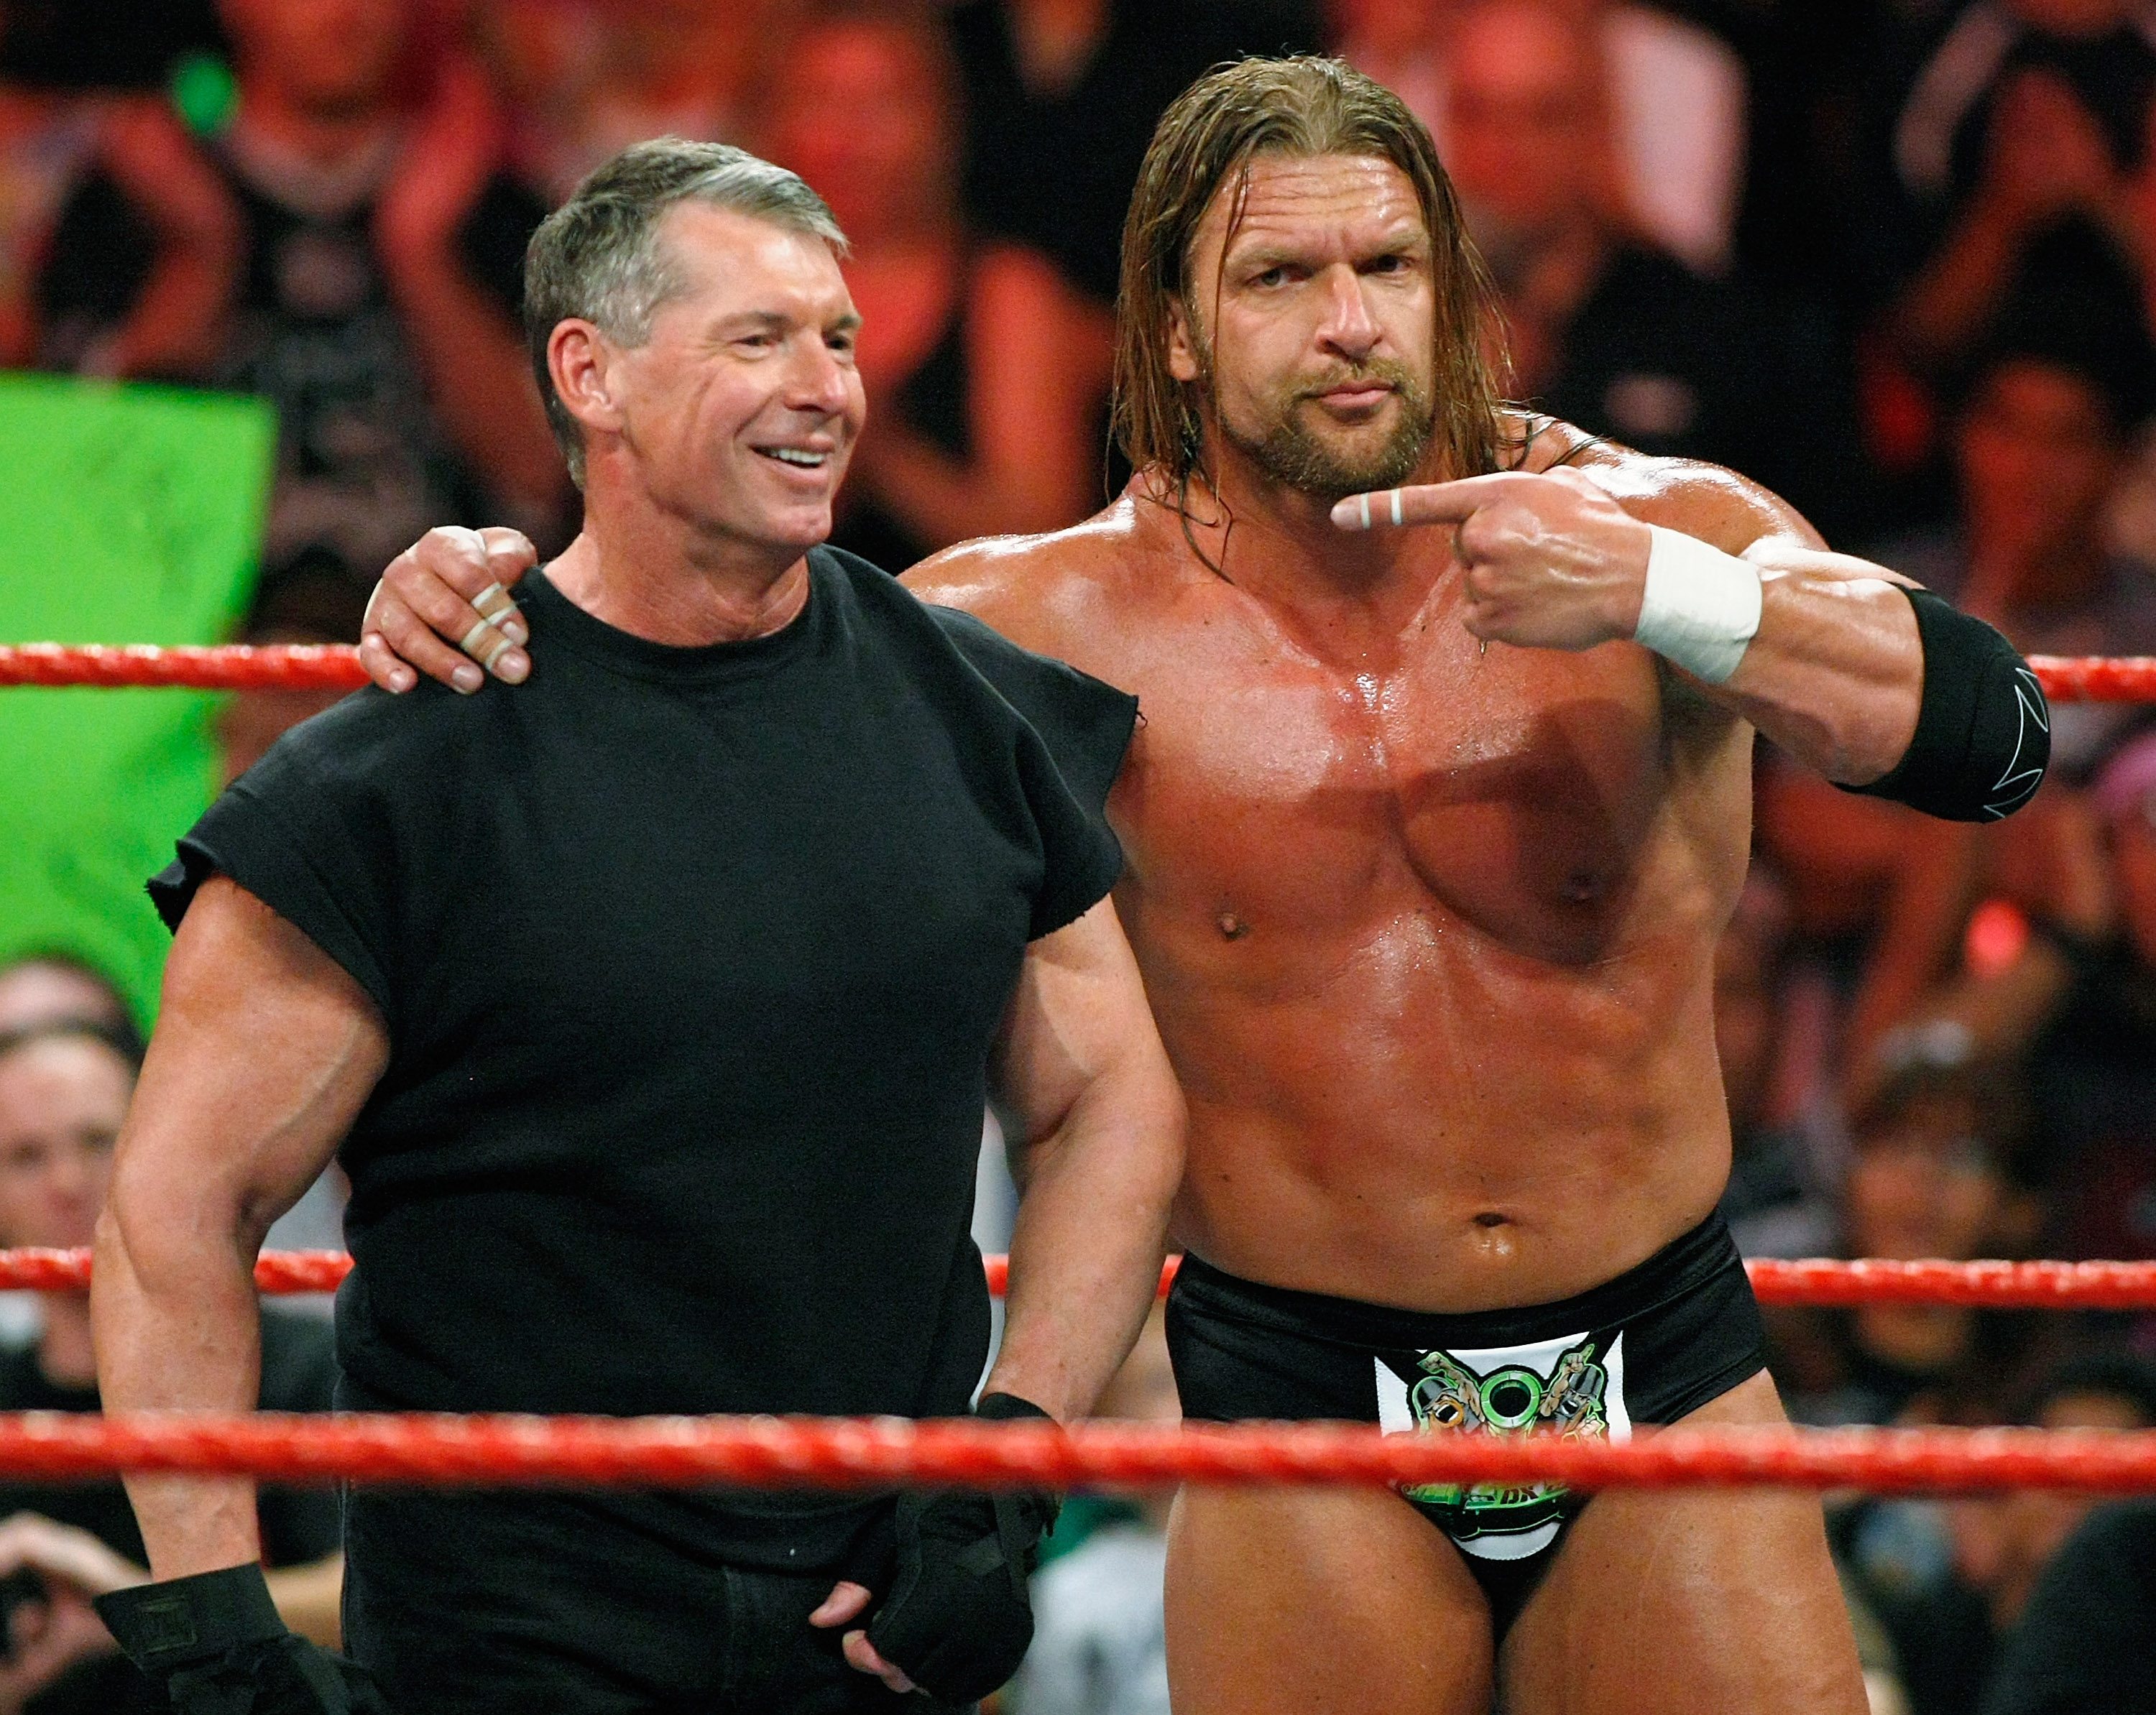 Vince McMahon to Triple H: "You've still got a lot to learn, pal"